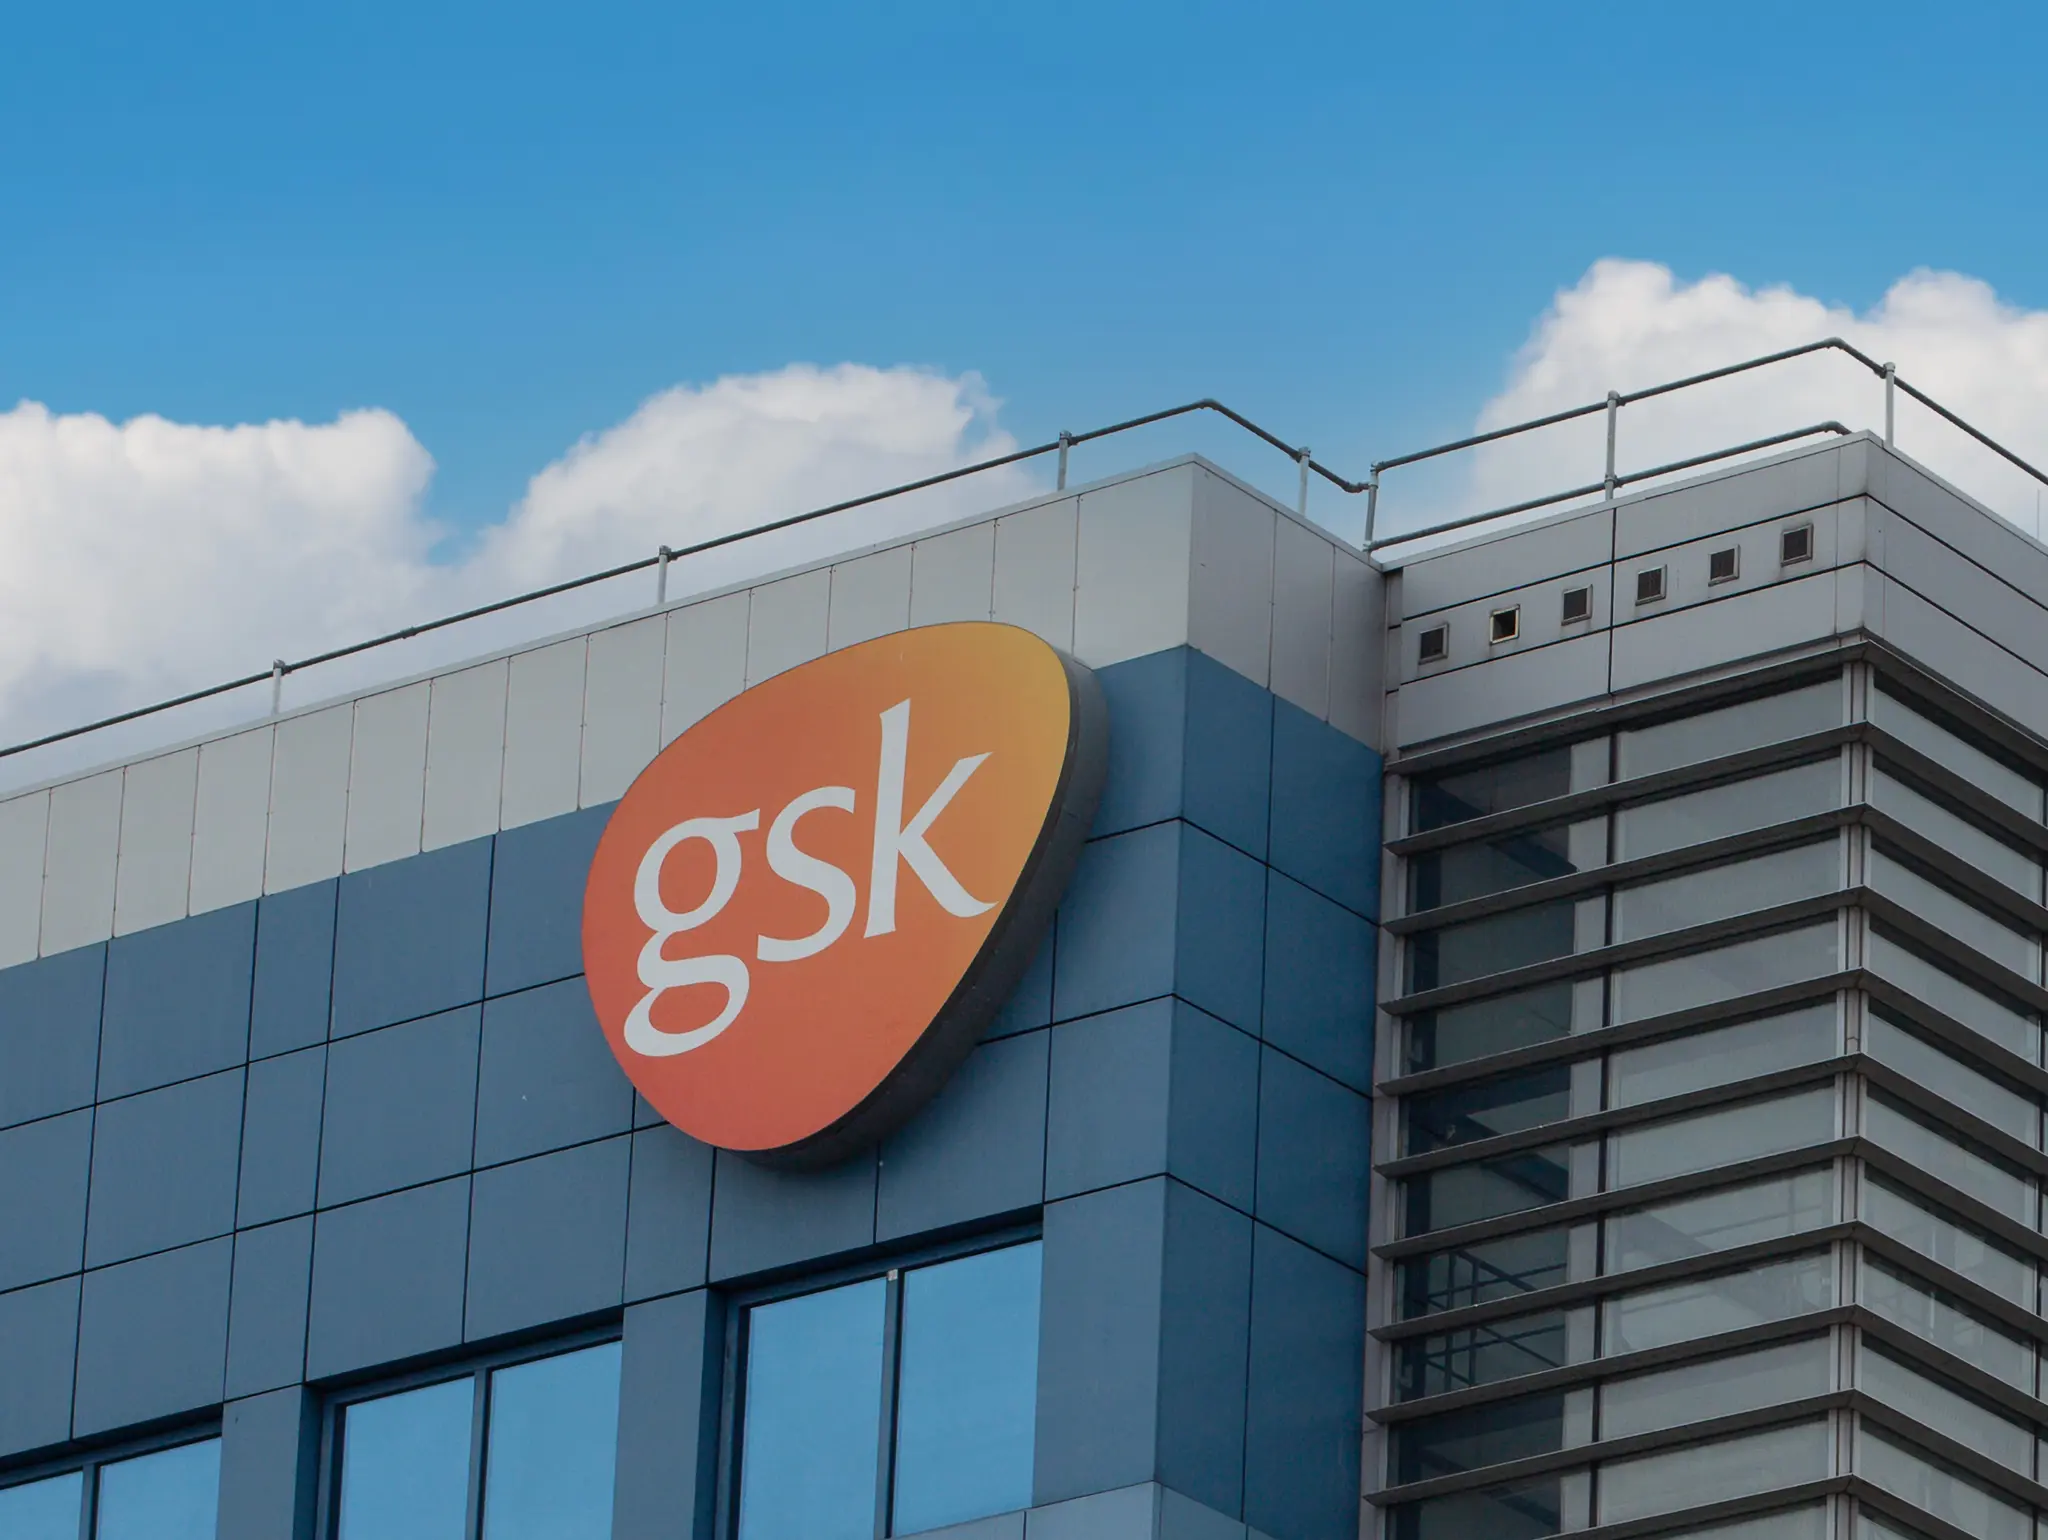 Trade union Unite calls for GSK staff walkouts over pay increase disputes